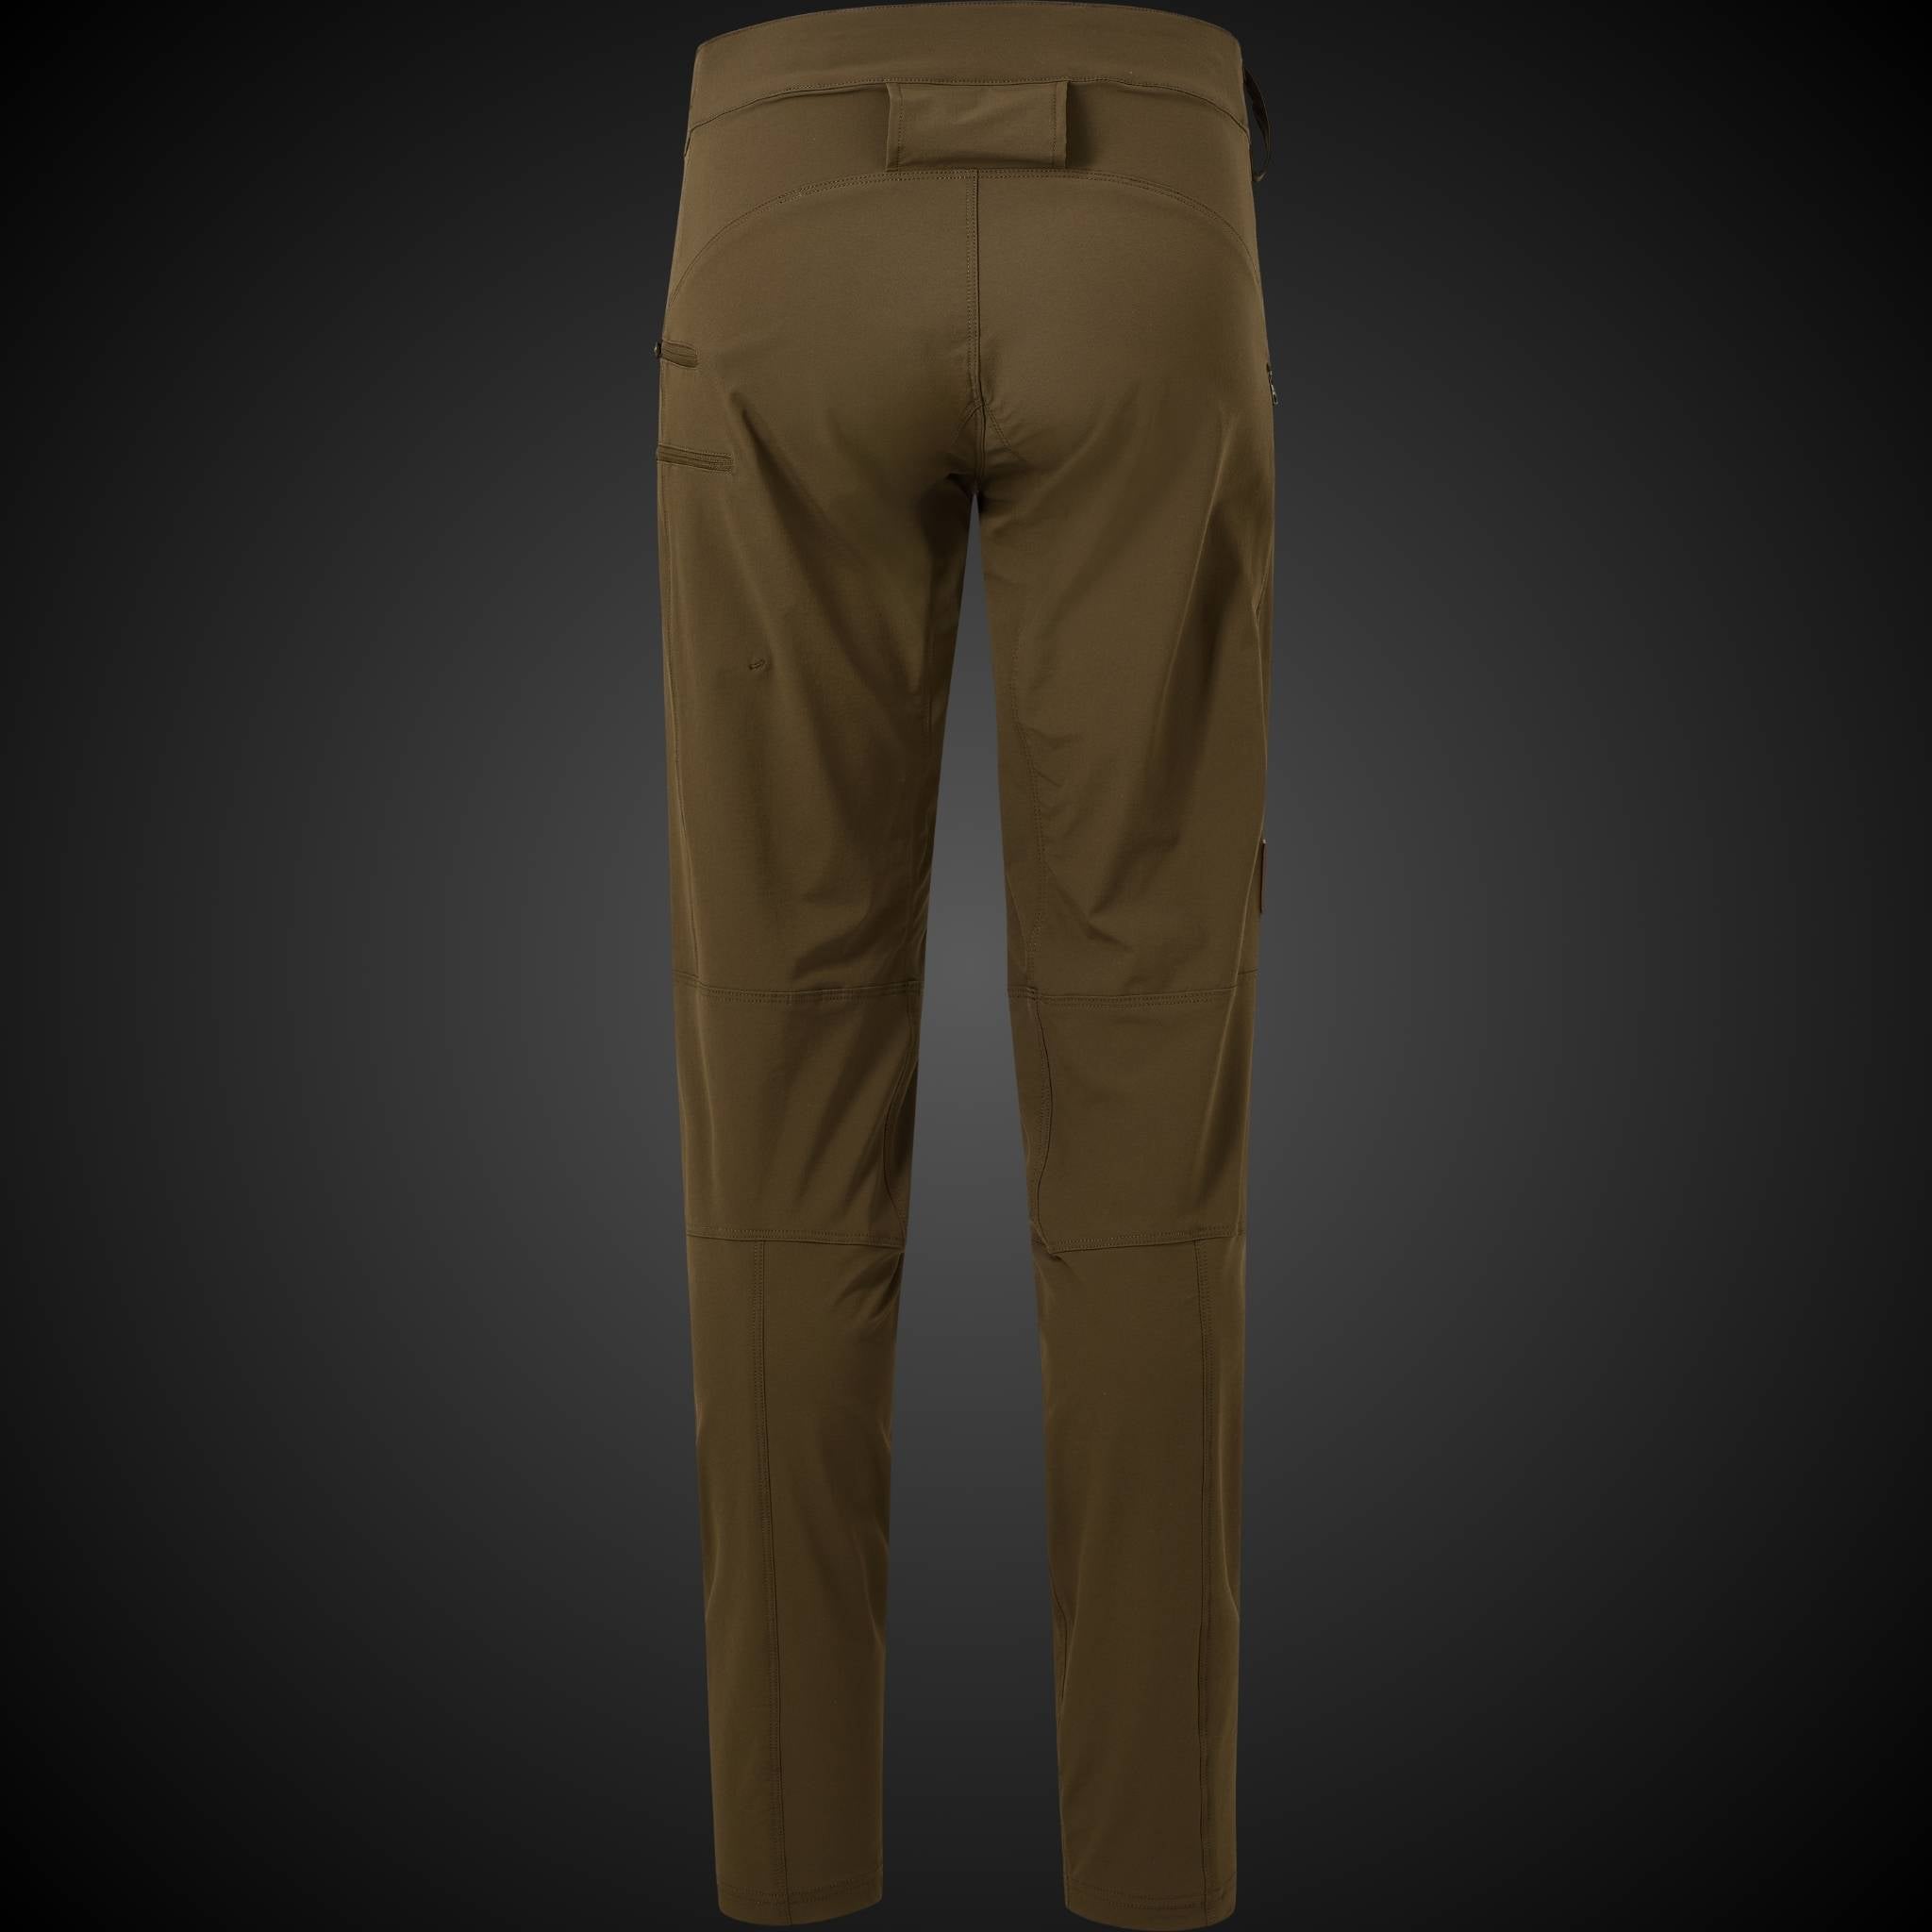 All-condition khaki MTB pants, Gravity 1.02, blending comfort with endurance for challenging outdoor biking trails